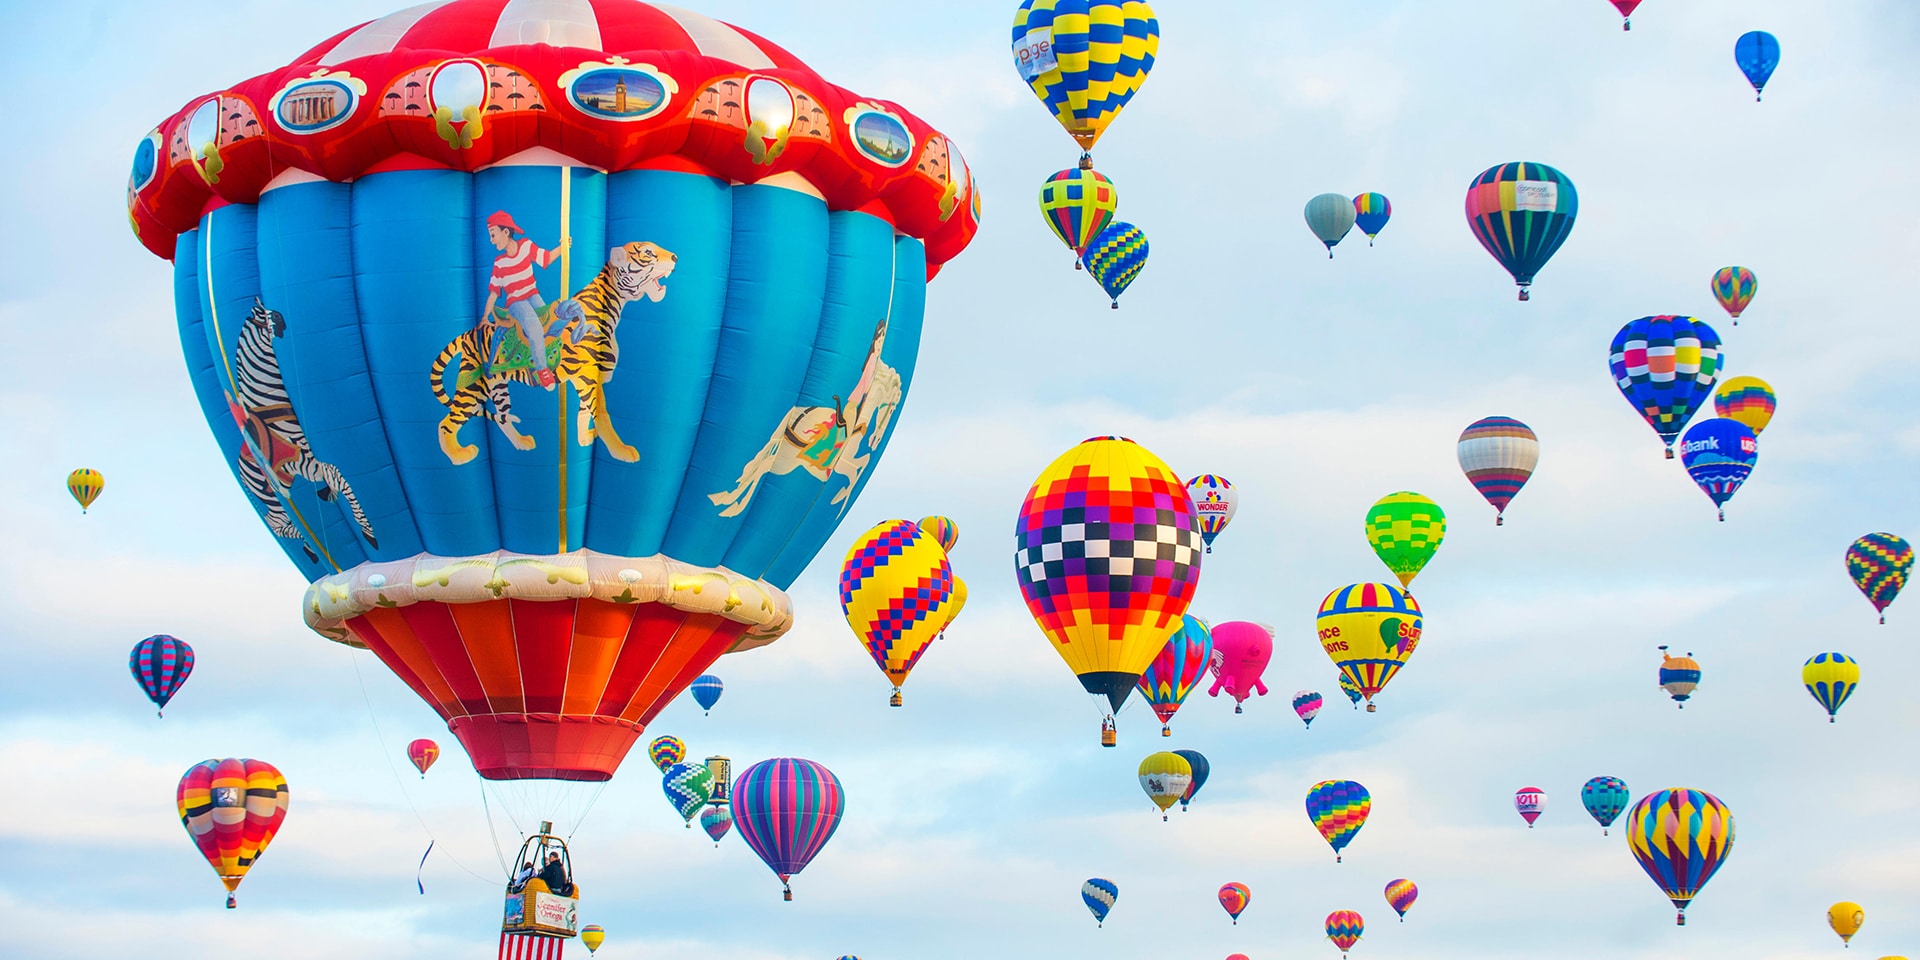 Road trips from Albuquerque to see air balloons.